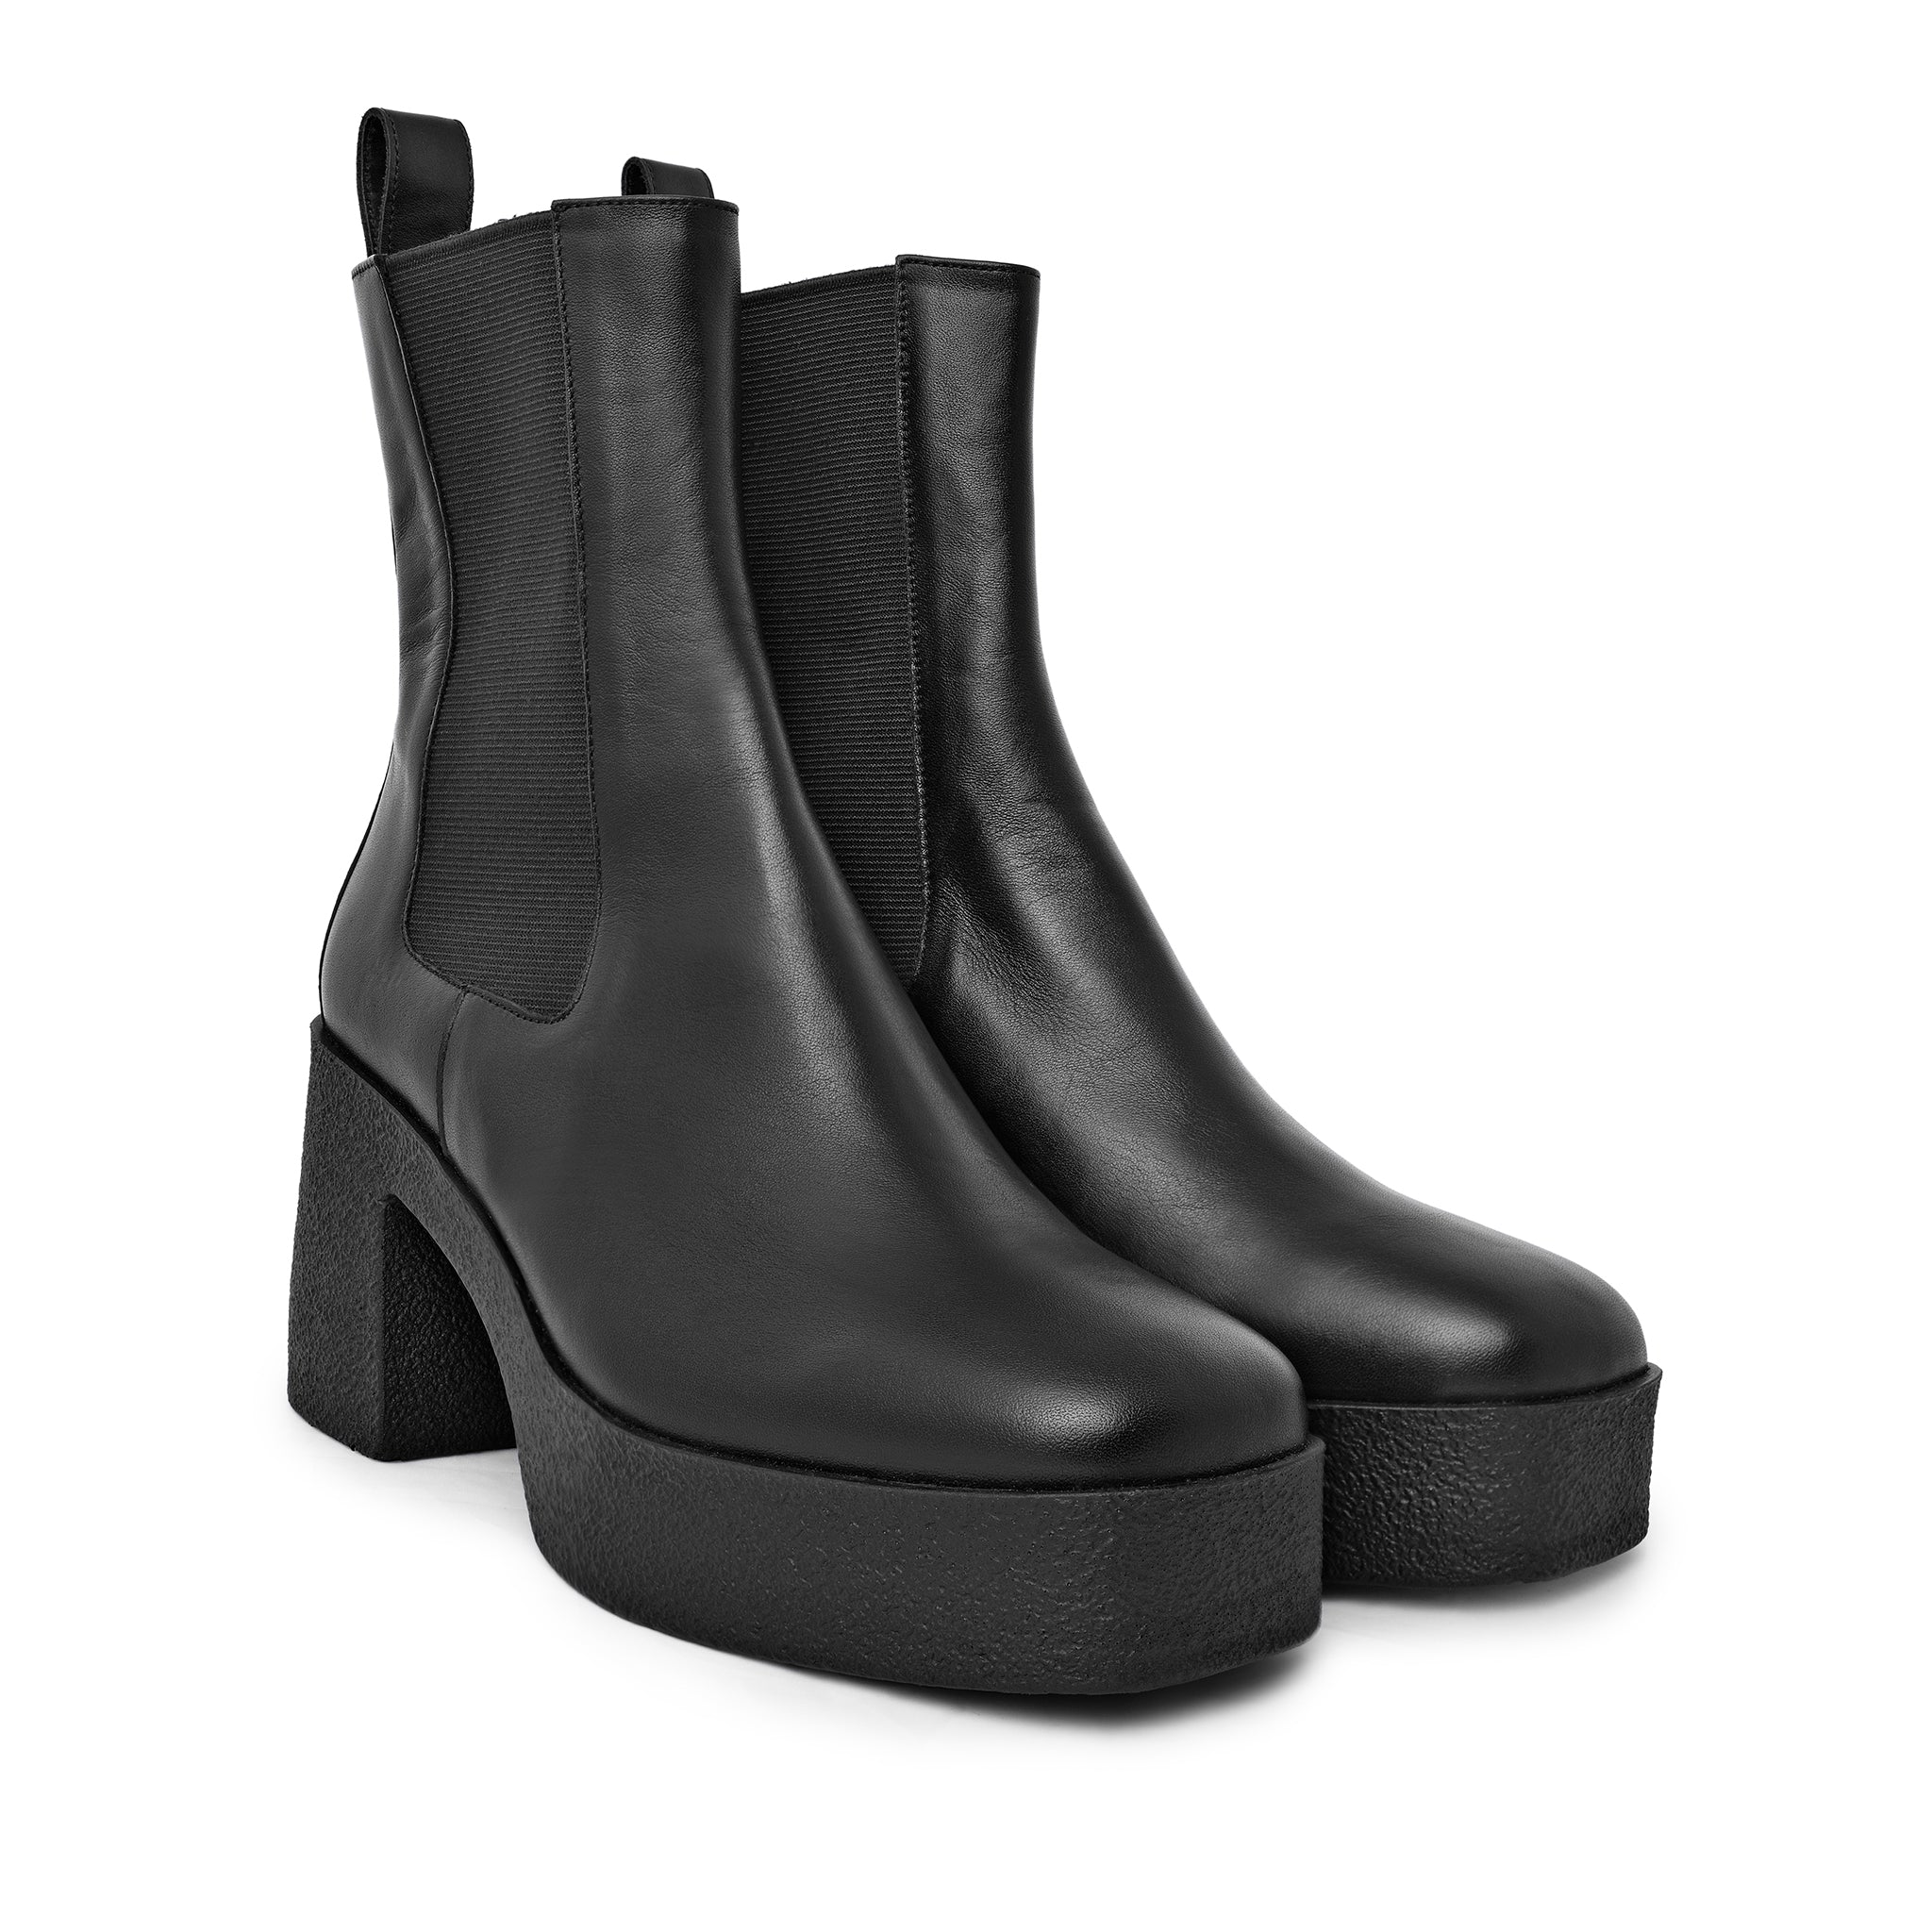 Momo Black Leather Chelsea Boots 20077-04-01 - 10